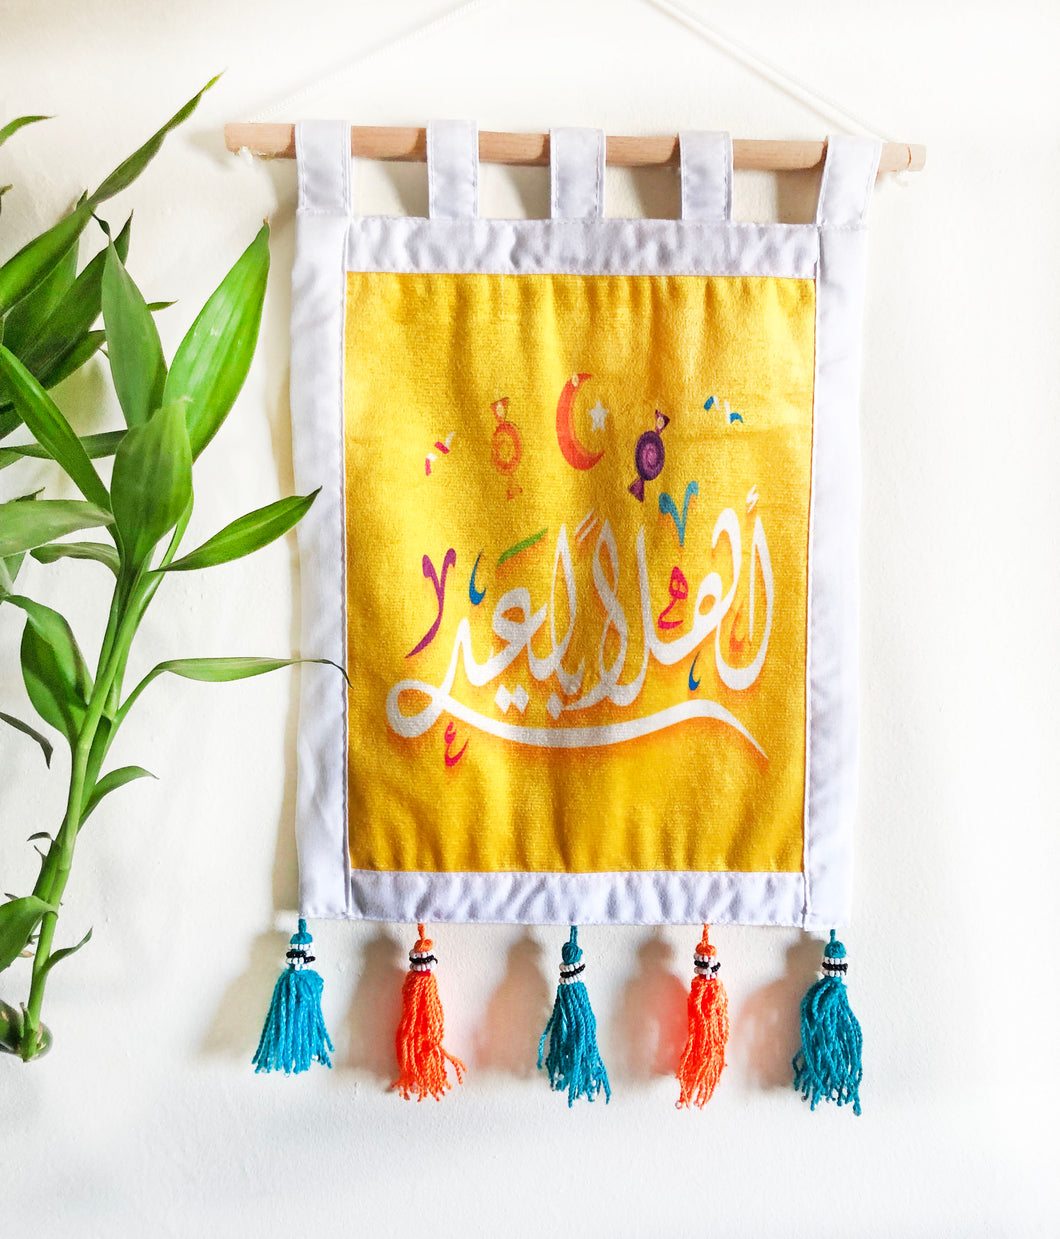 Velvet Eid Wall Decoration with Arabic Calligraphy and Colorful Tassels